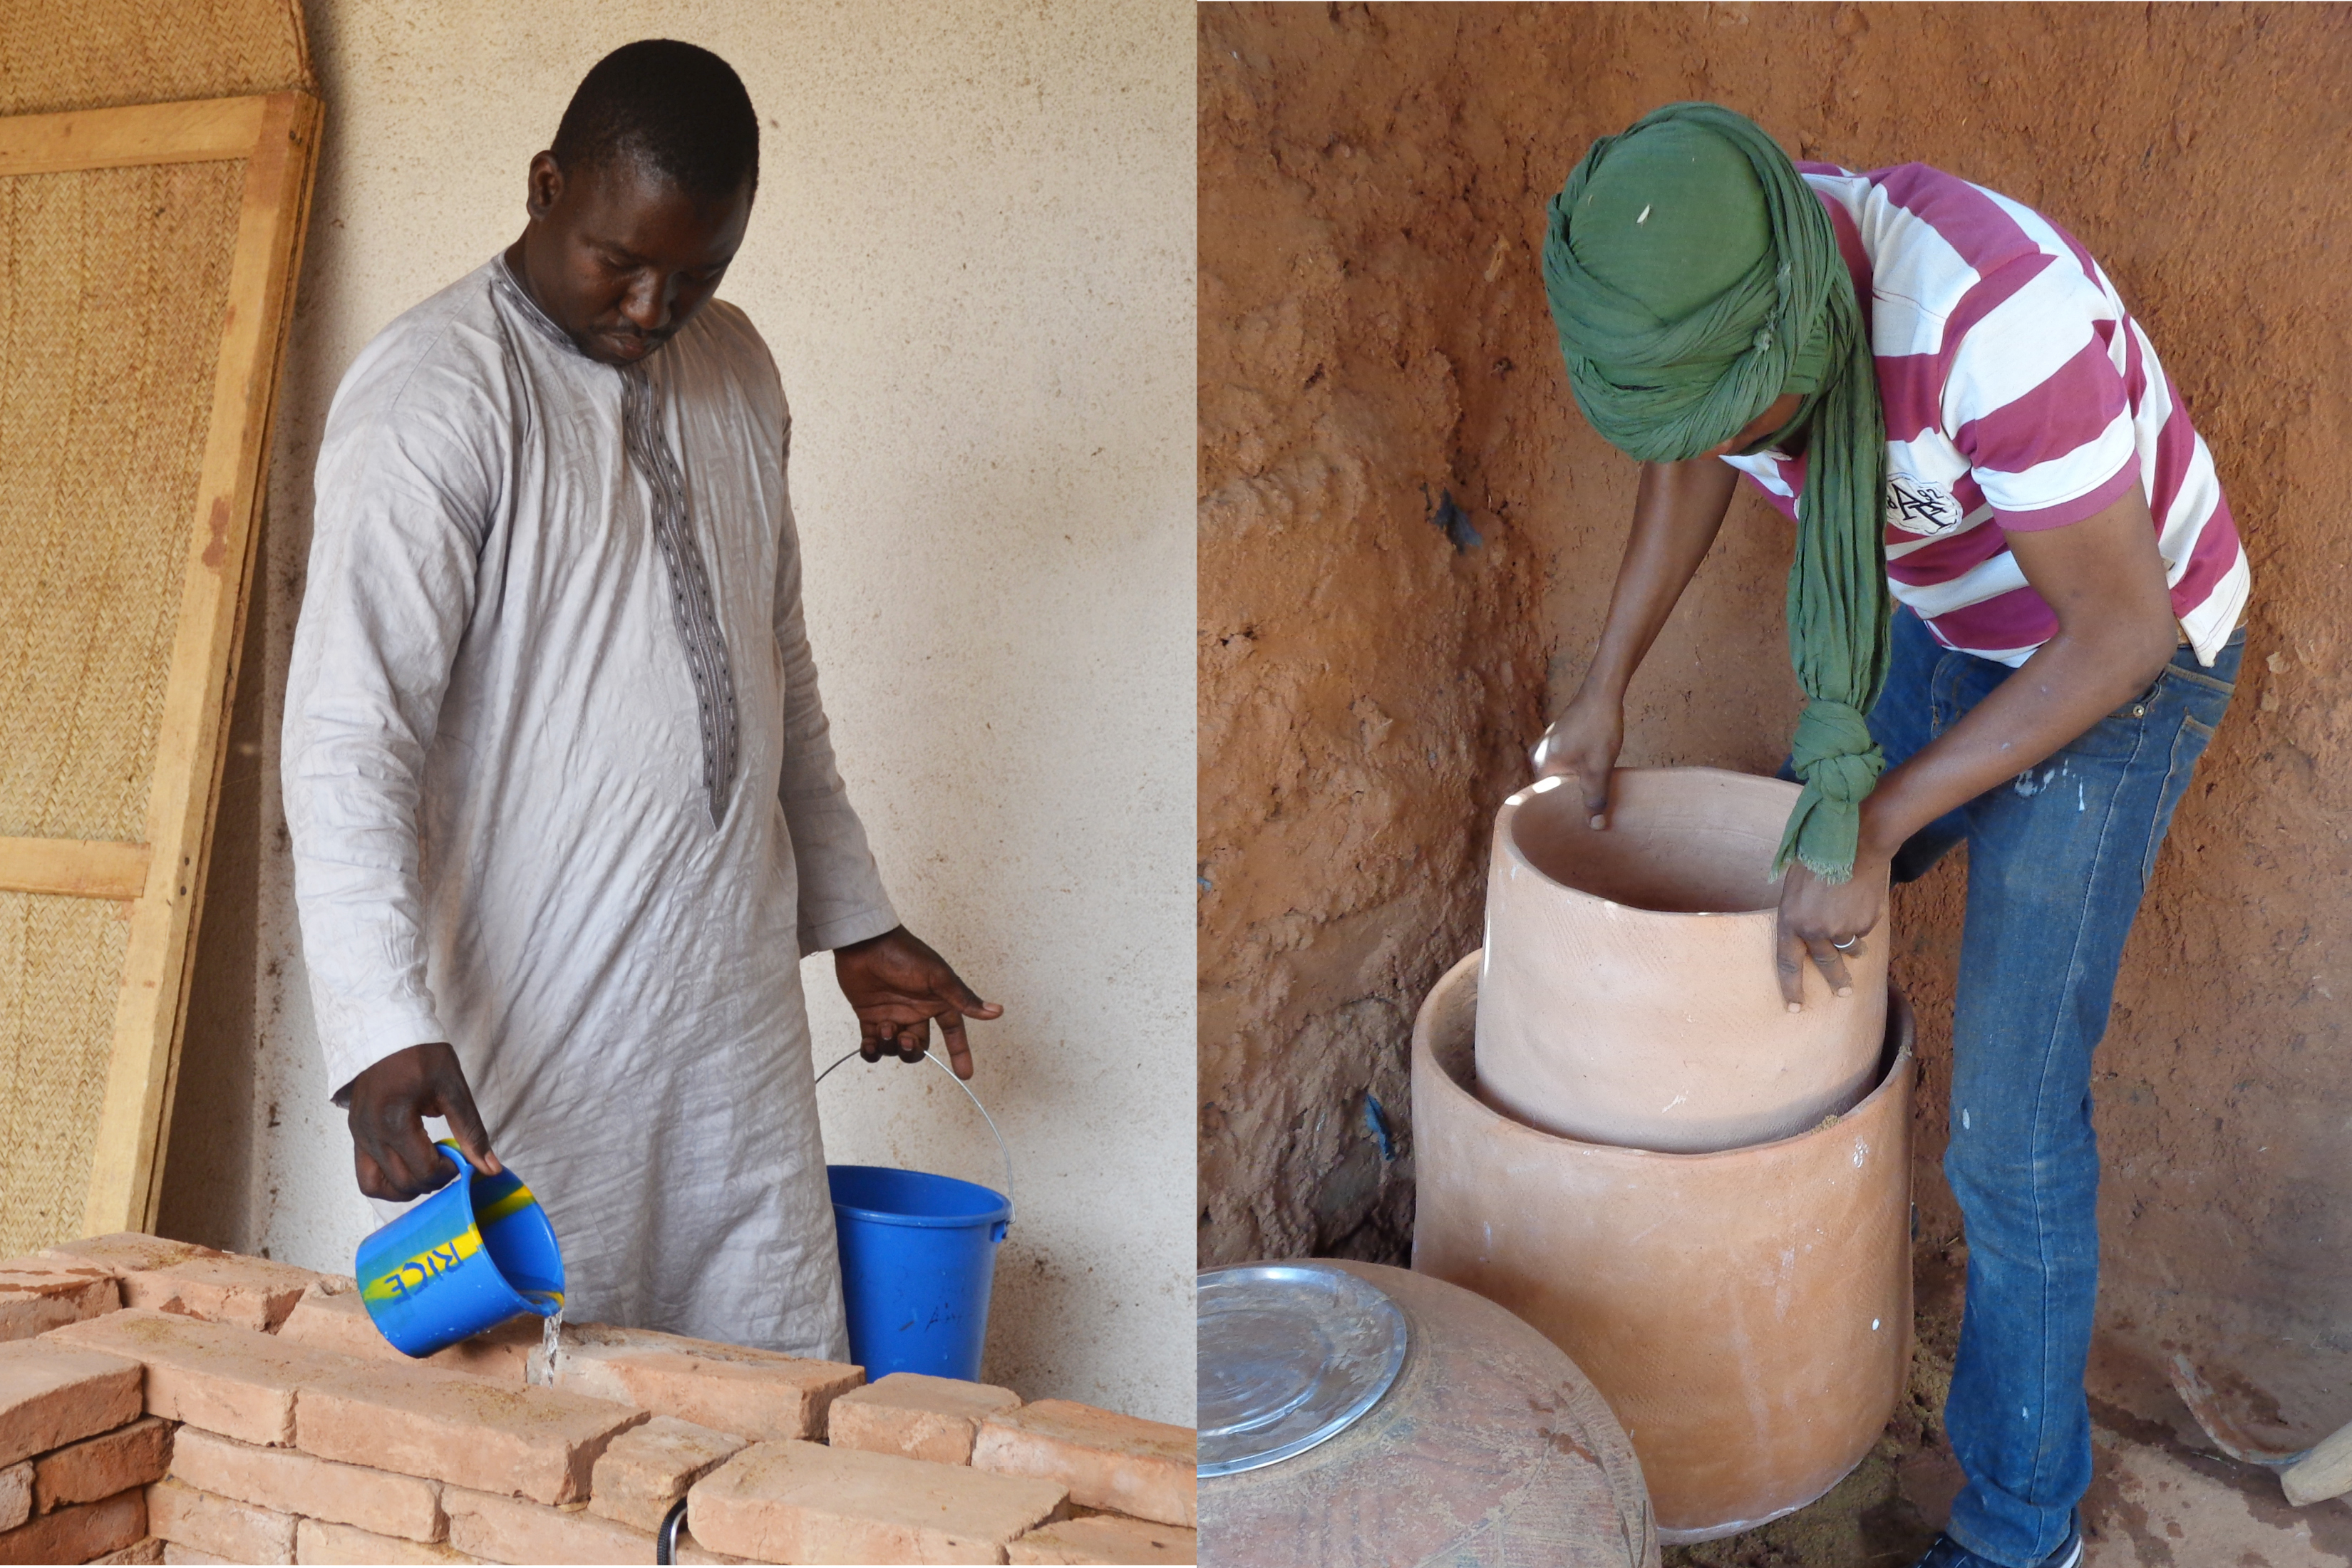 "Evaporative Cooling Technologies for Improved Vegetable Storage in Mali" is a new report from MIT D-Lab and CITE. At left, University of Bamako graduate student Aliou Coulibaly adds water to an evaporative cooling chamber in Bamako. At right, World Vegetable Center technician Fatogoma Tanou assembles a clay pot cooler in Mopti.